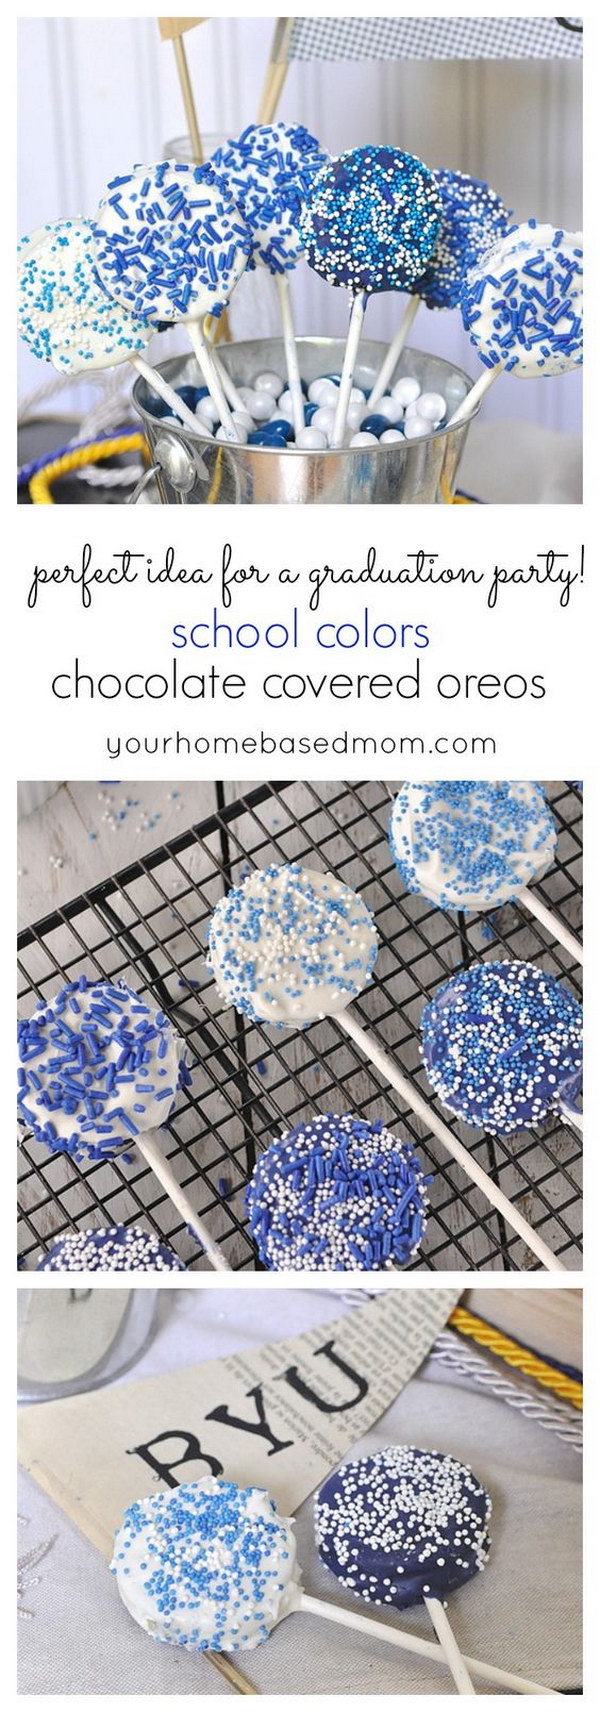 School Colors Chocolate Covered Oreos. 